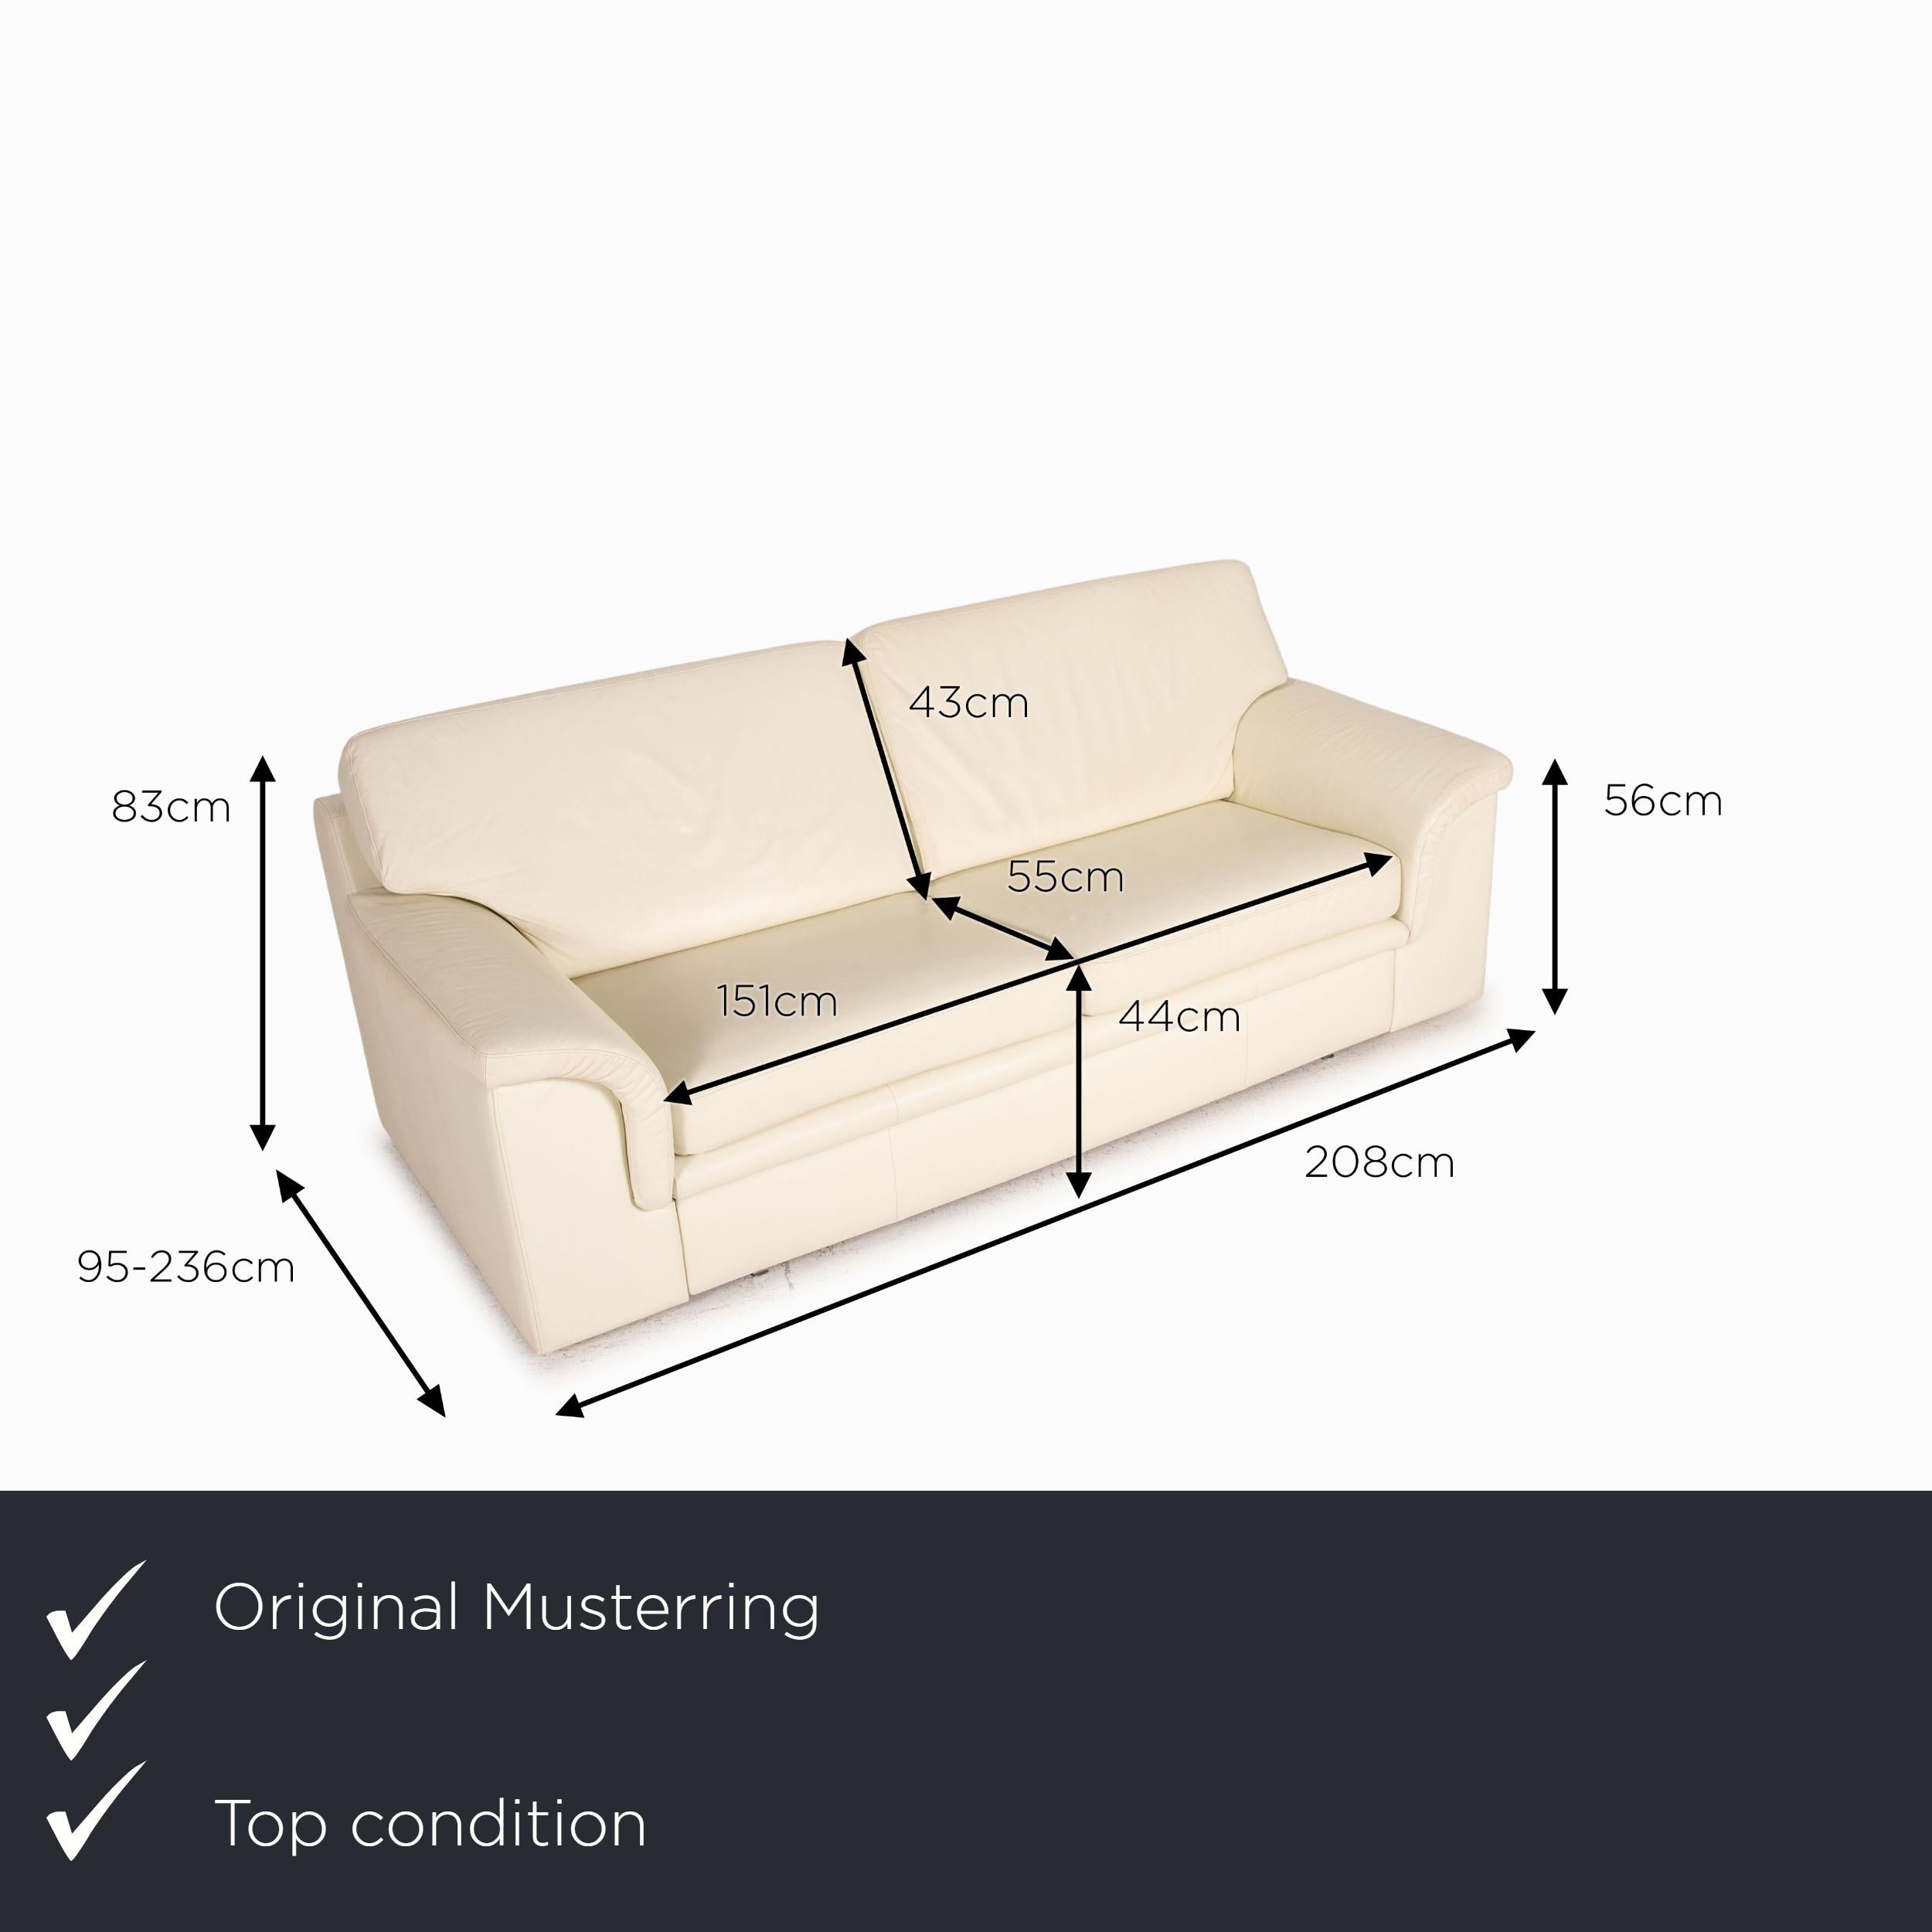 We present to you a Musterring leather sofa bed cream two-seater function sleeping function couch.
  
 

 Product measurements in centimeters:
 

 depth: 95
 width: 208
 height: 83
 seat height: 44
 rest height: 56
 seat depth: 55
 seat